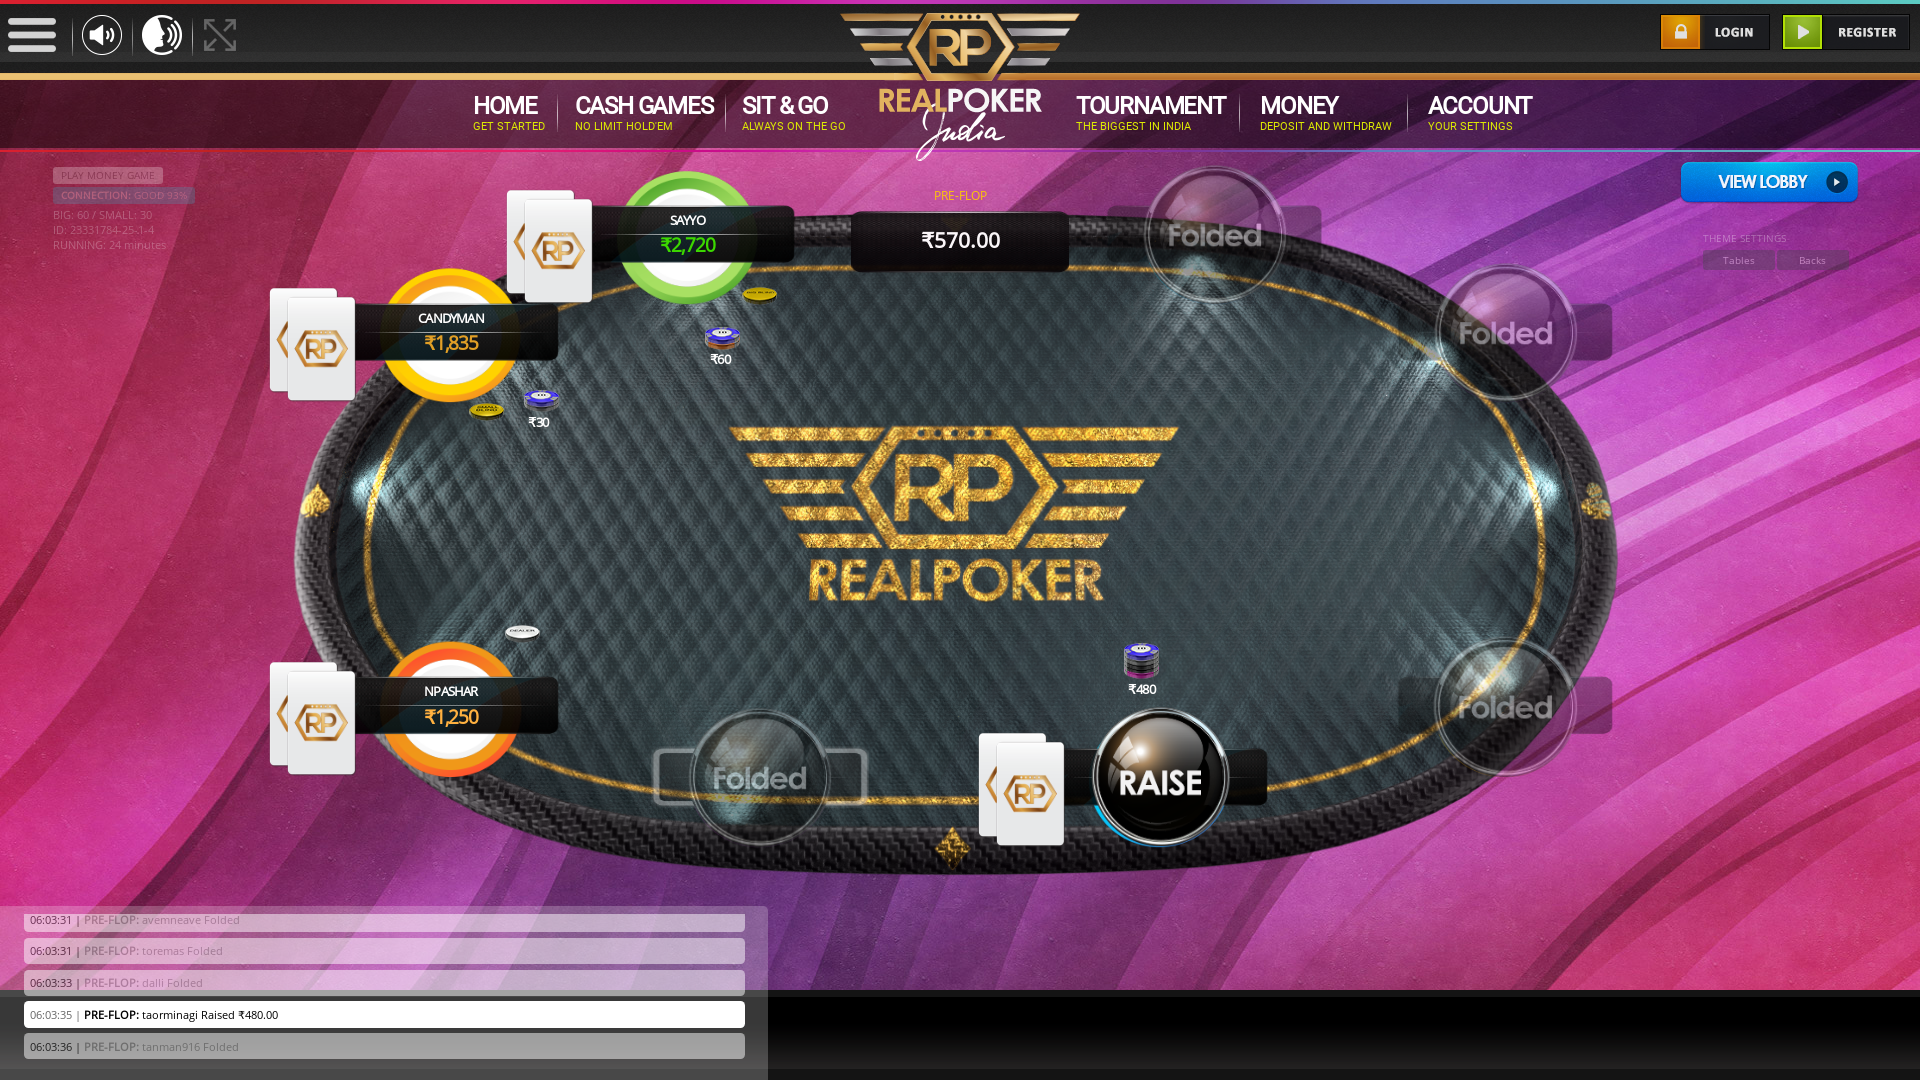 Real poker 10 player table in the 24th minute of the match